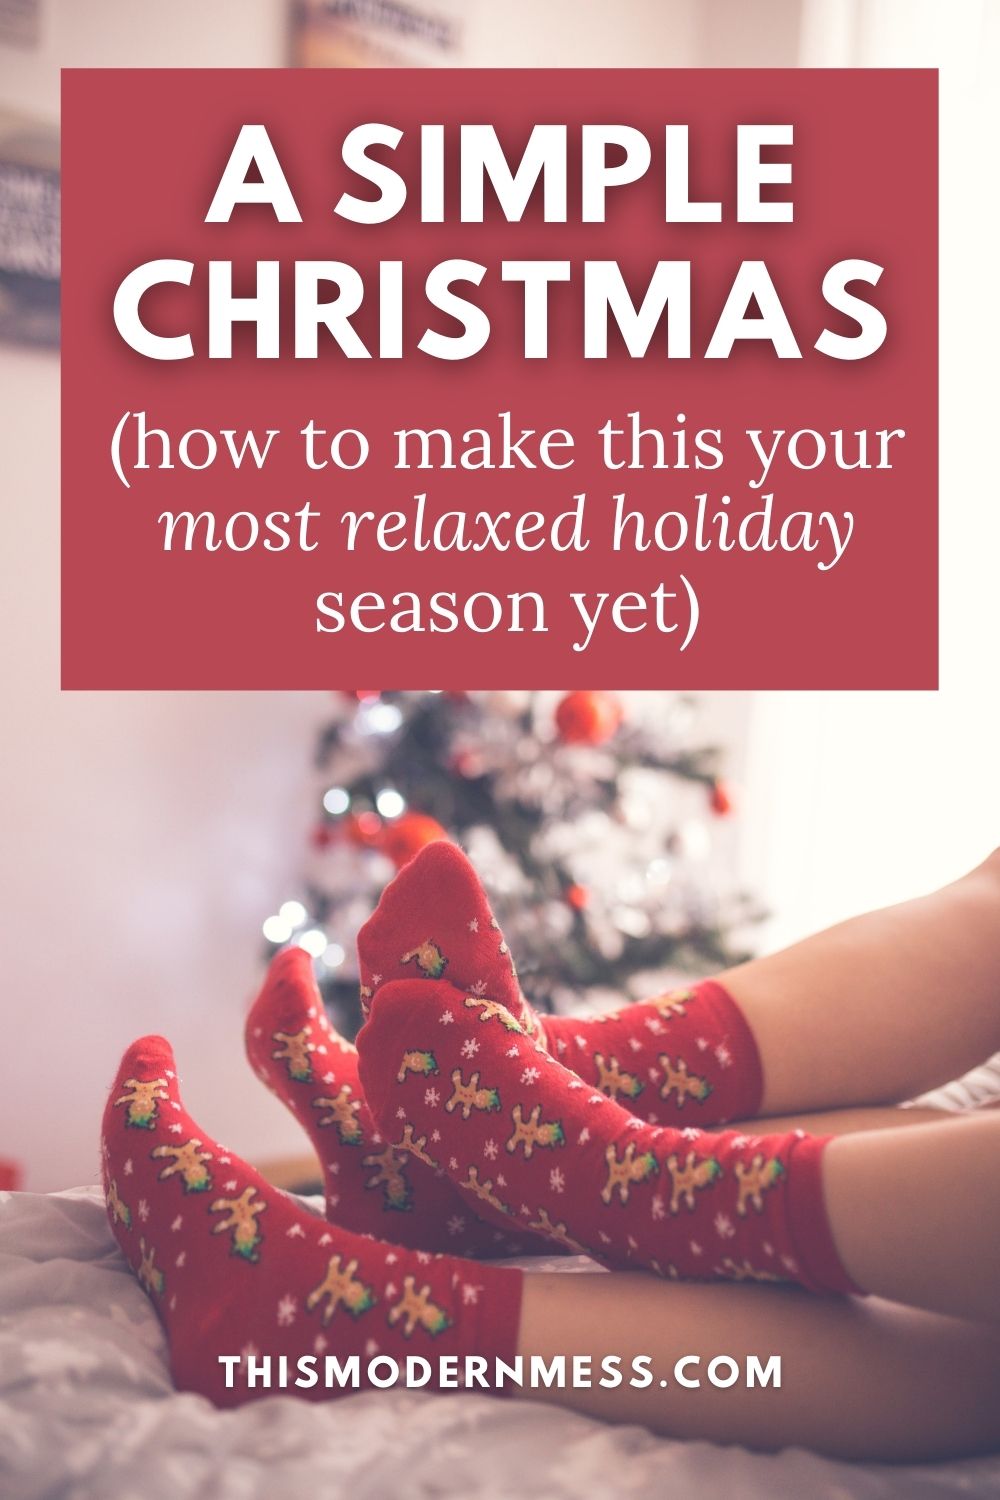 A Simple Christmas: How to Have a Relaxed Holiday Season